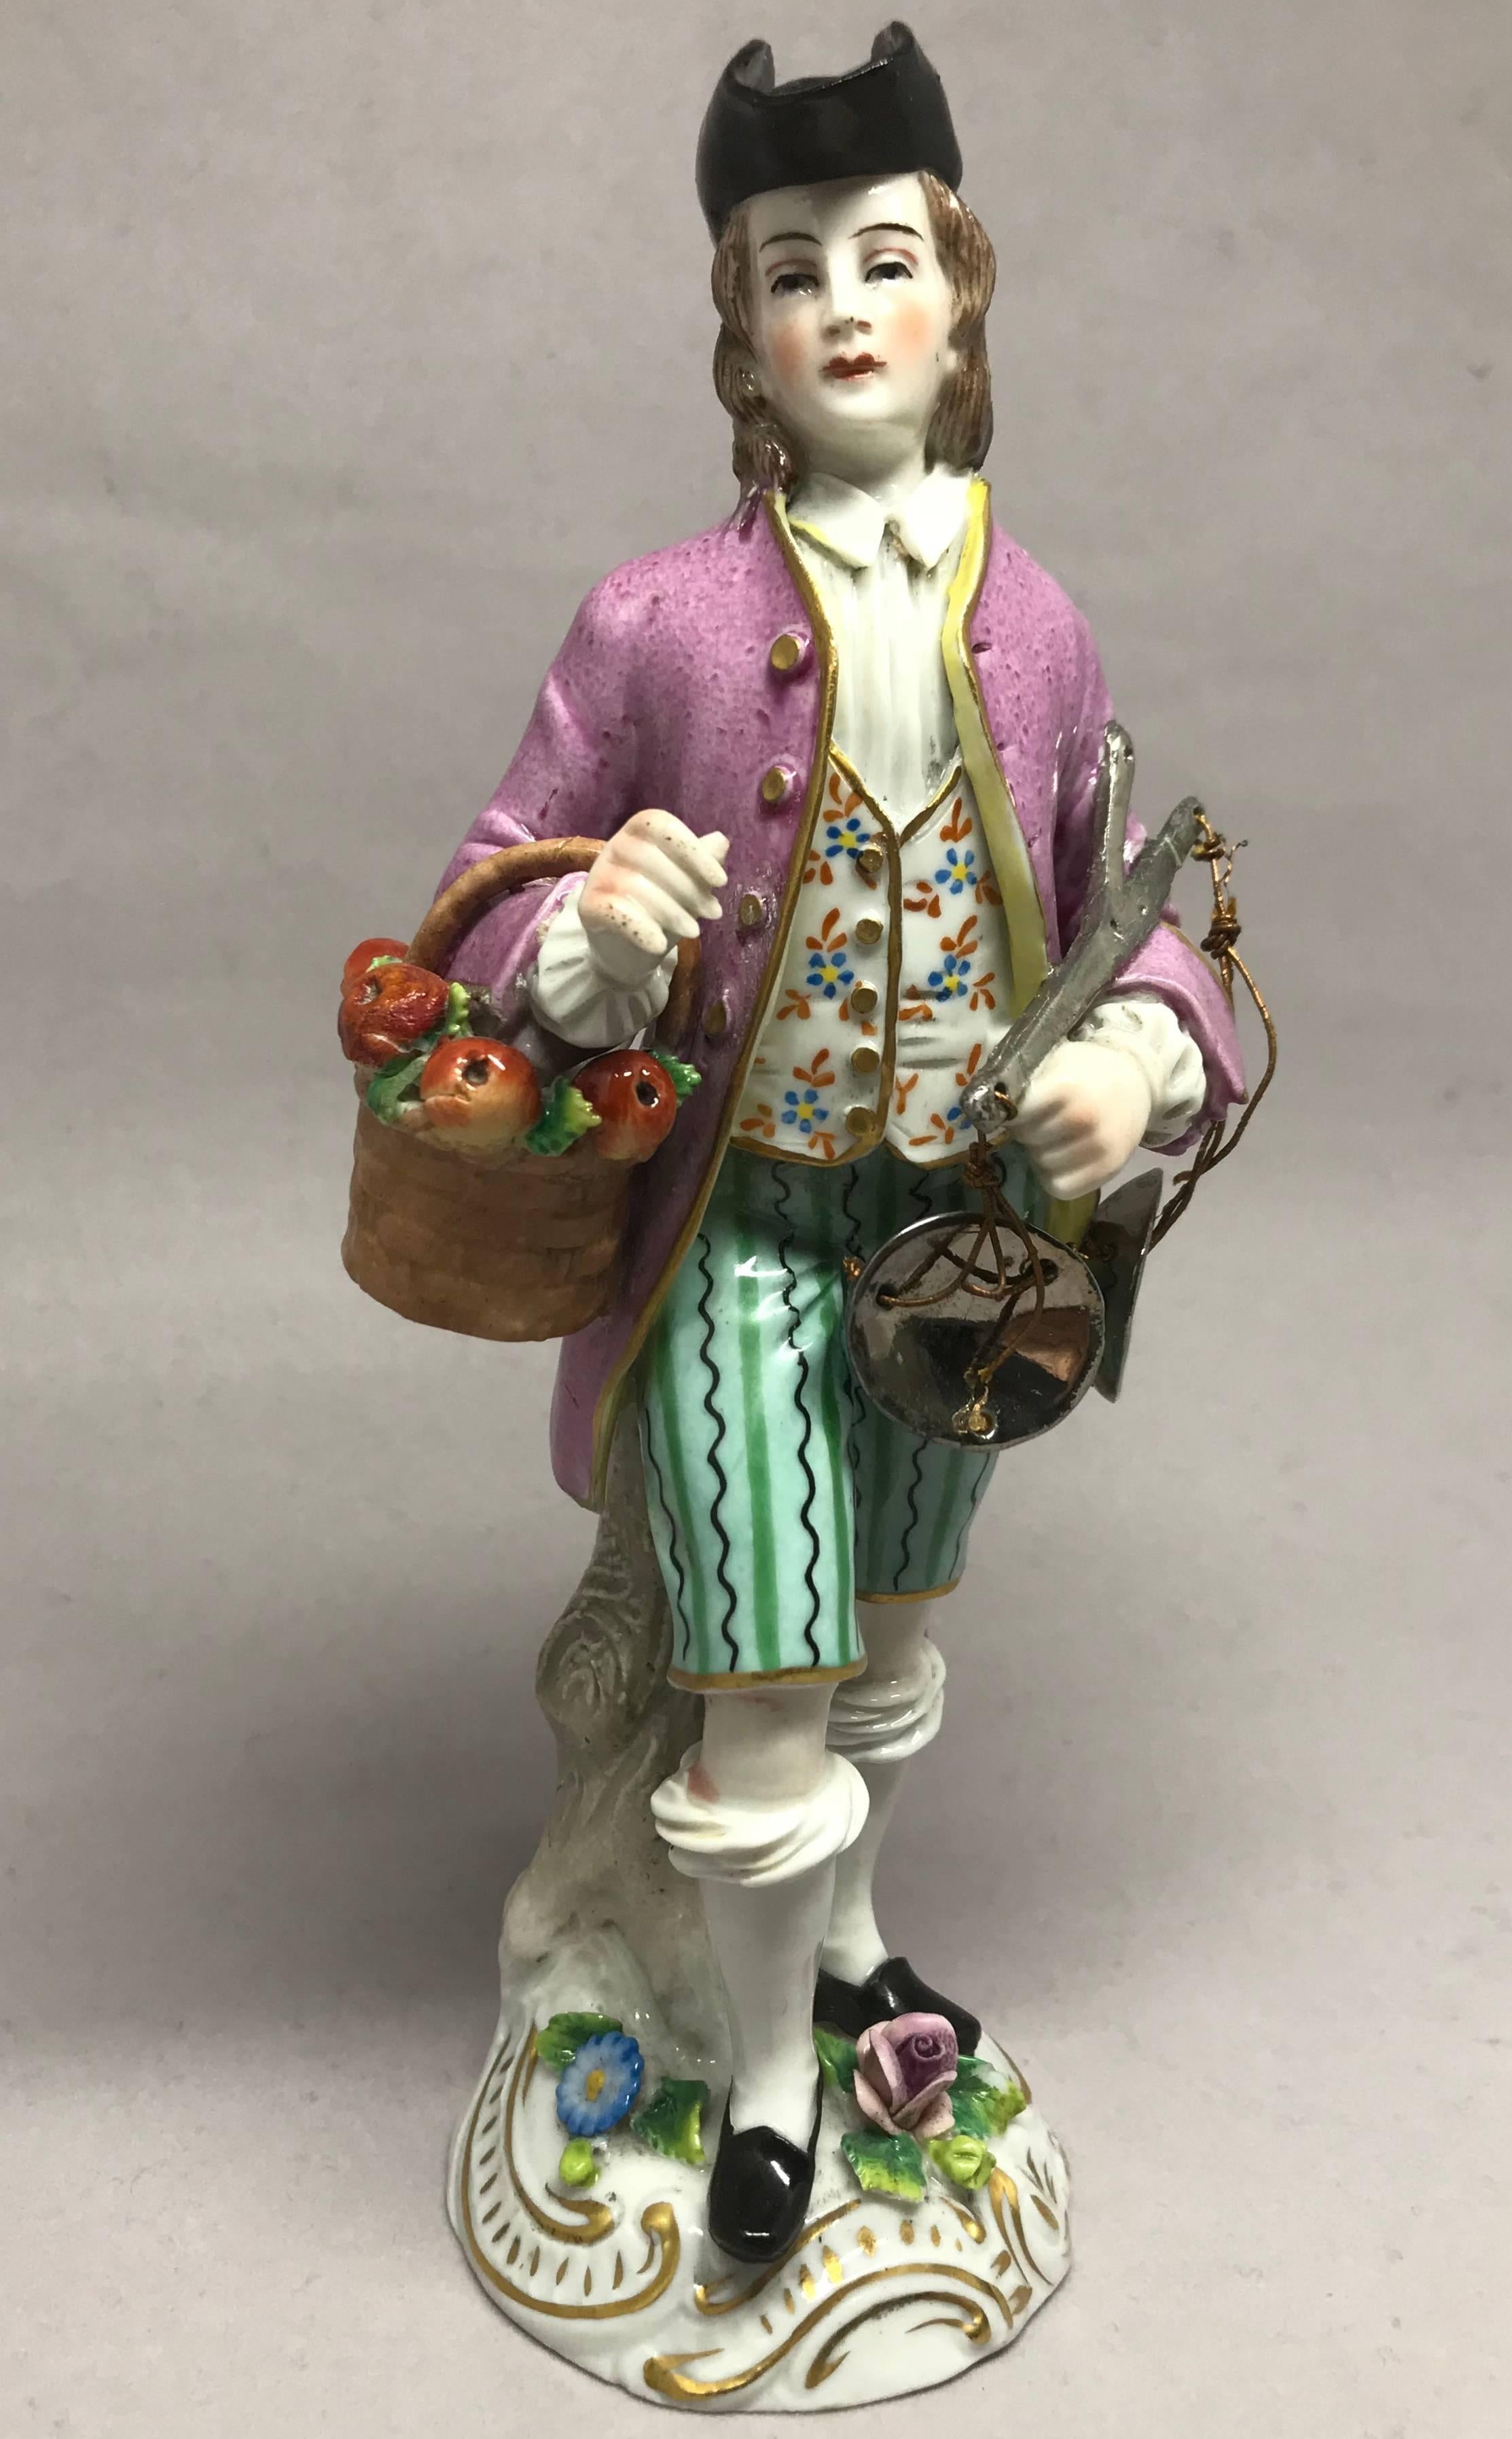 Porcelain figure of apple seller. Capodimonte porcelain figure of an apple seller with basket and scale. Spurious marks for Capodimonte; Italian or possibly German. Europe, late 19th century.
Dimensions: 3